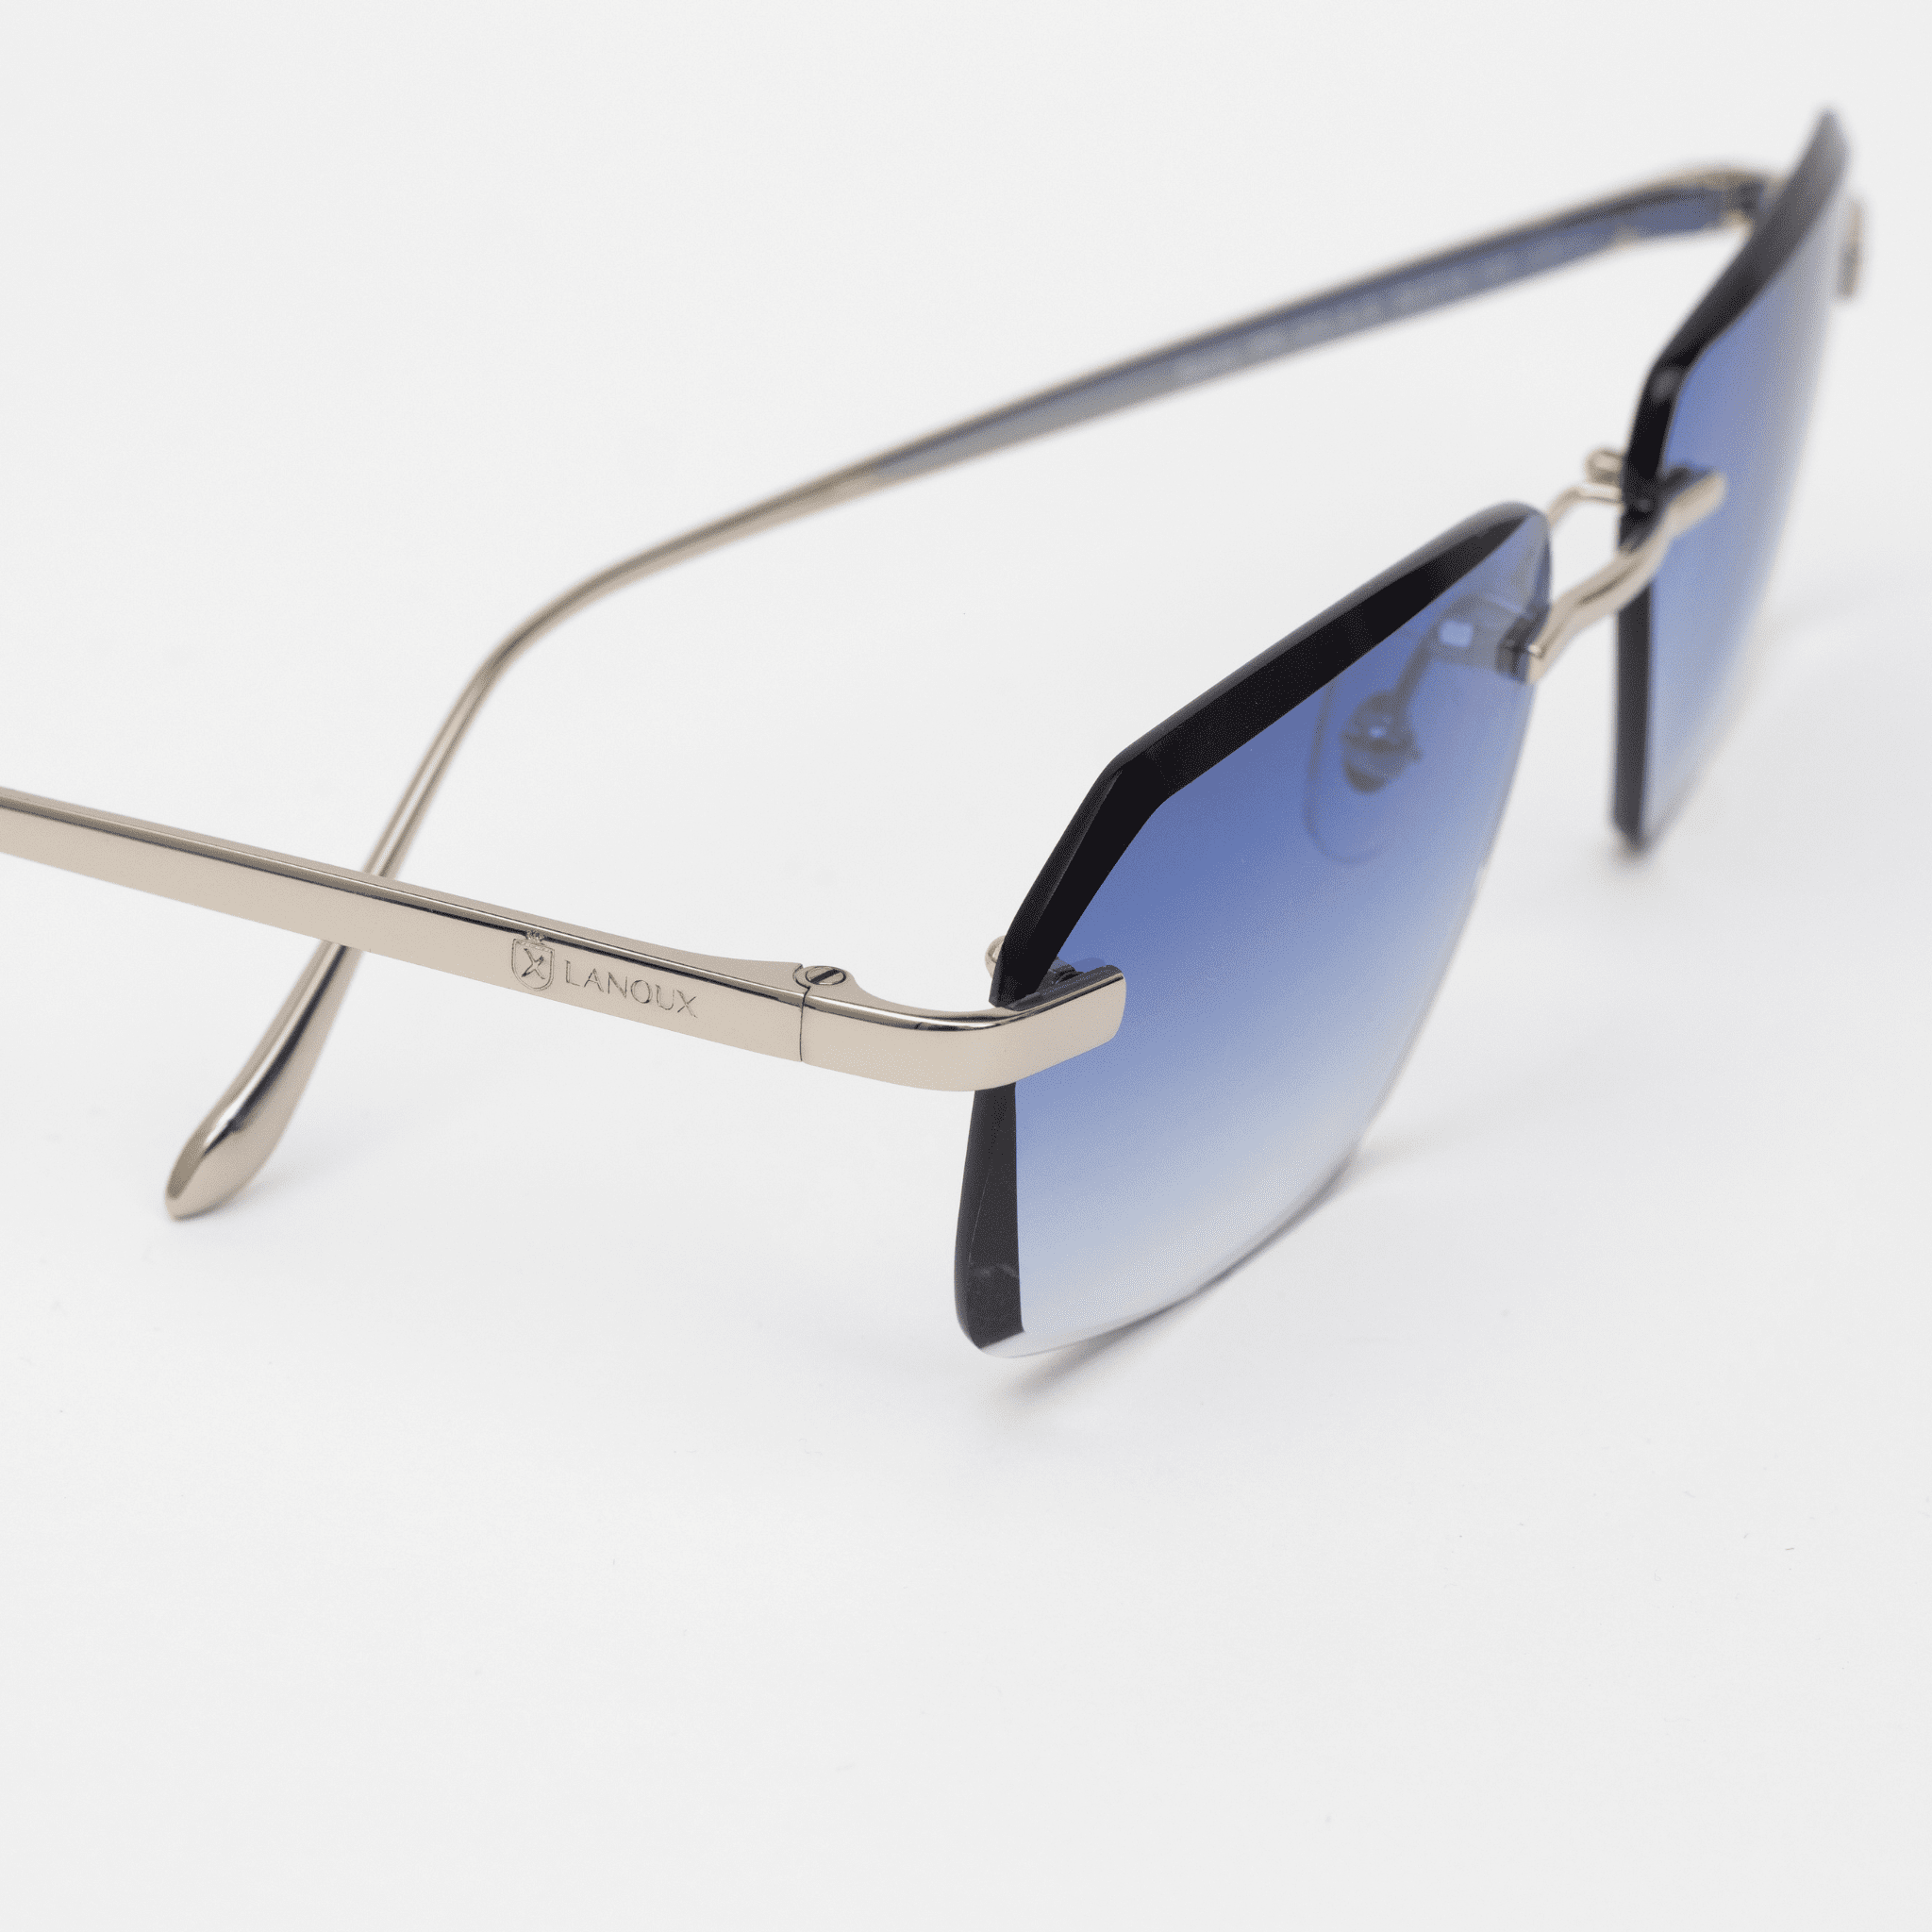 Close-up of the side of Sancy model sunglasses, displaying the elegant sterling silver arm with the 'LANOUX' logo, alongside the onyx blue diamond-cut rimless lenses, against a white background